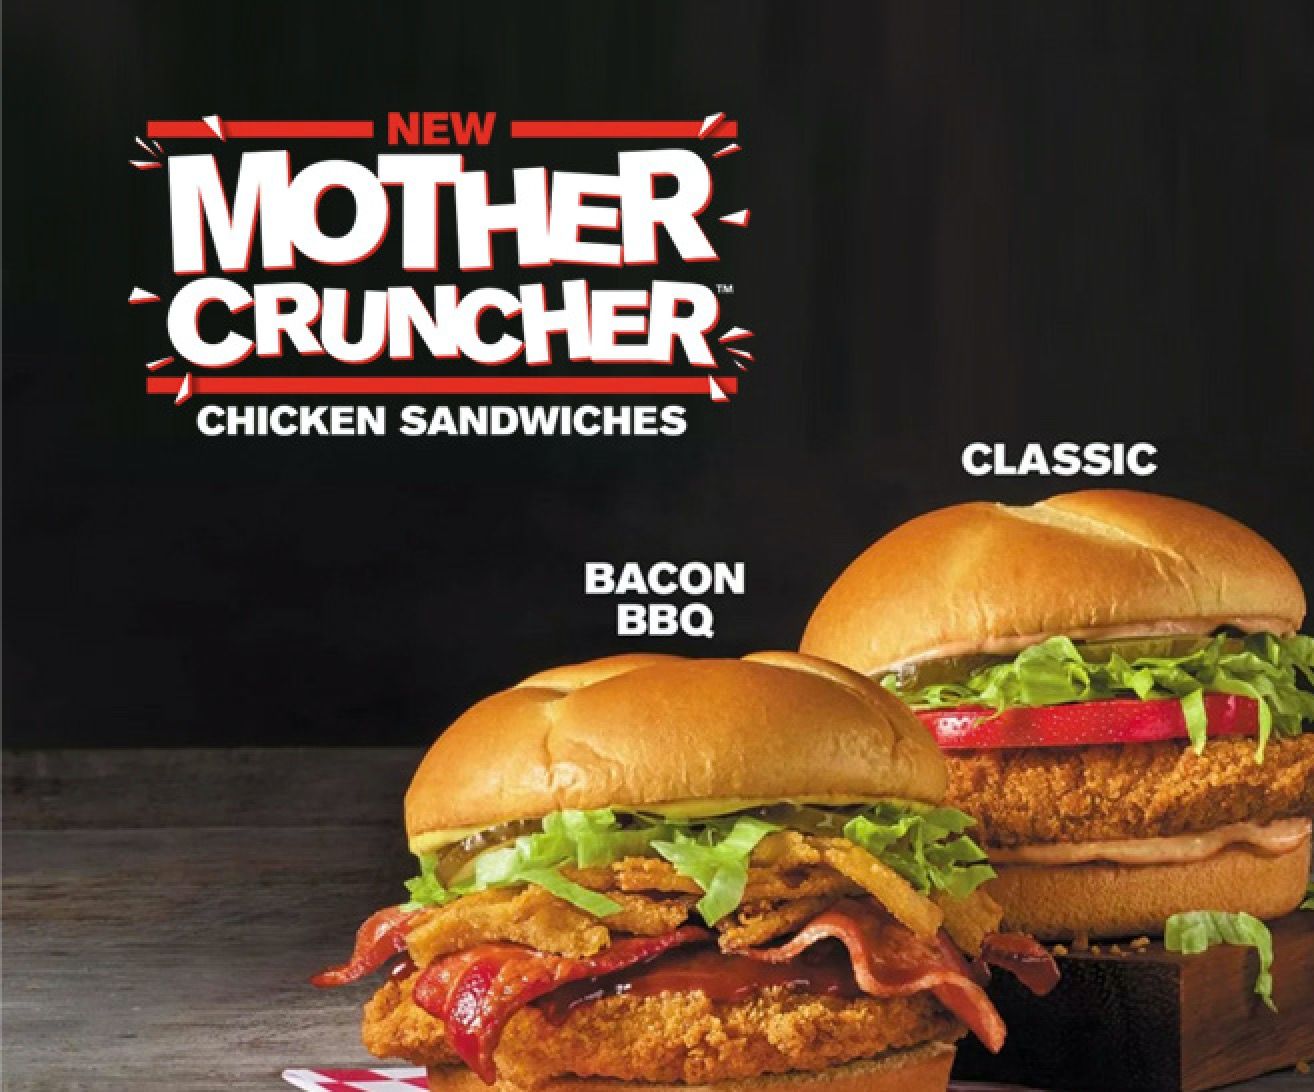 Free Mother Cruncher Chicken Sandwich with $5+ Purchase at Rally's Drive-in